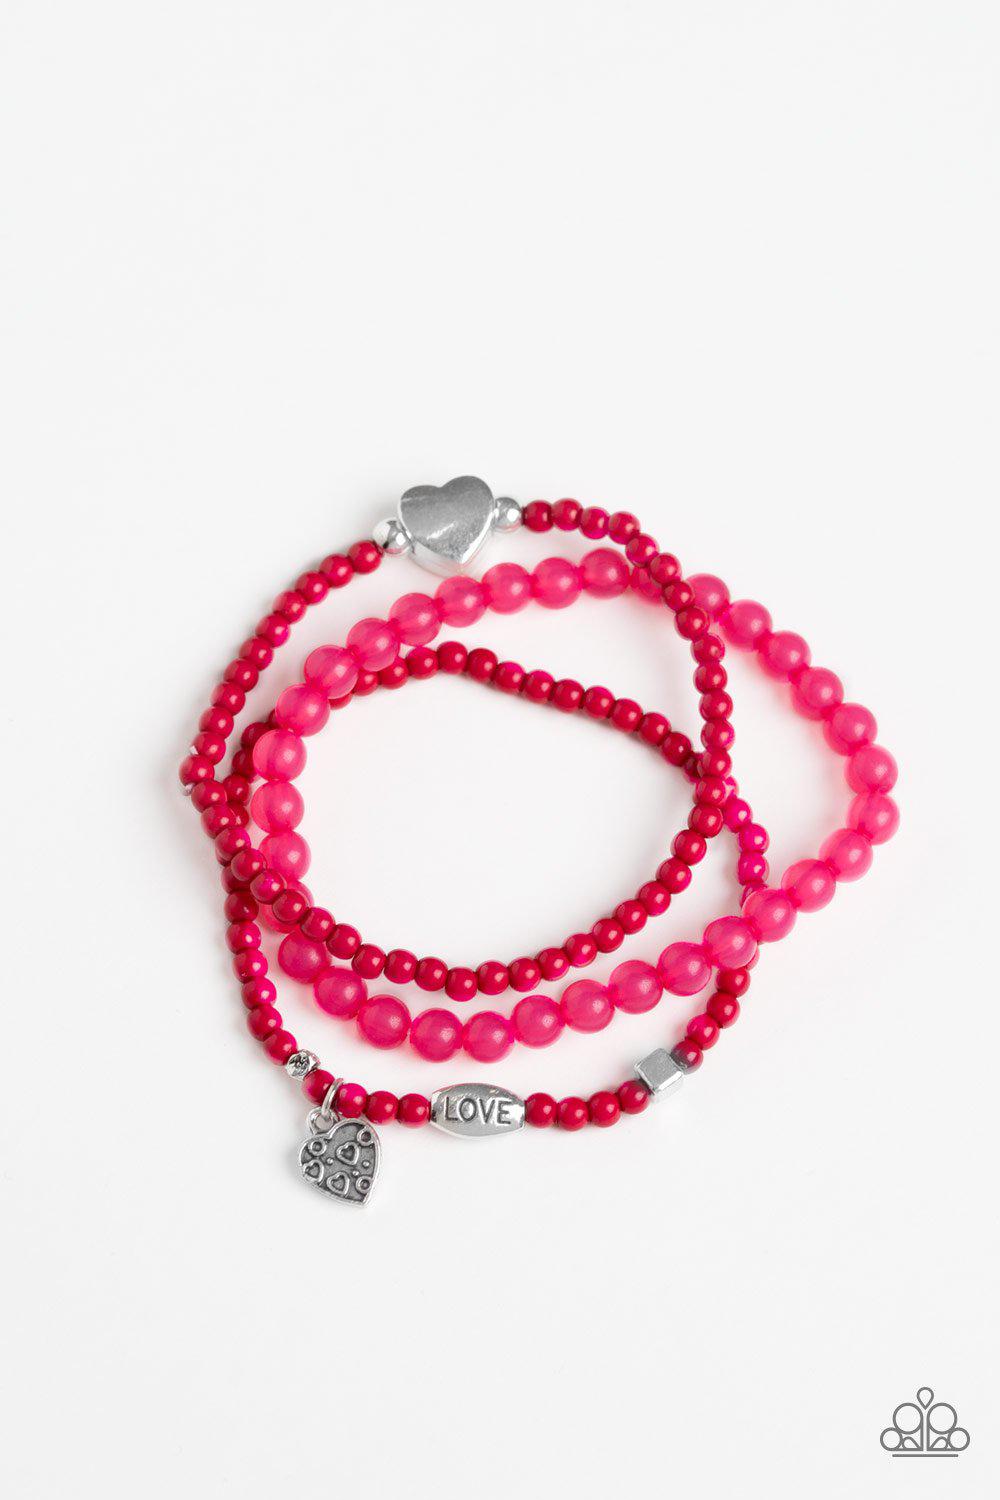 Really Romantic Hot Pink and Silver Heart Stretch Bracelet Set - Paparazzi Accessories-CarasShop.com - $5 Jewelry by Cara Jewels